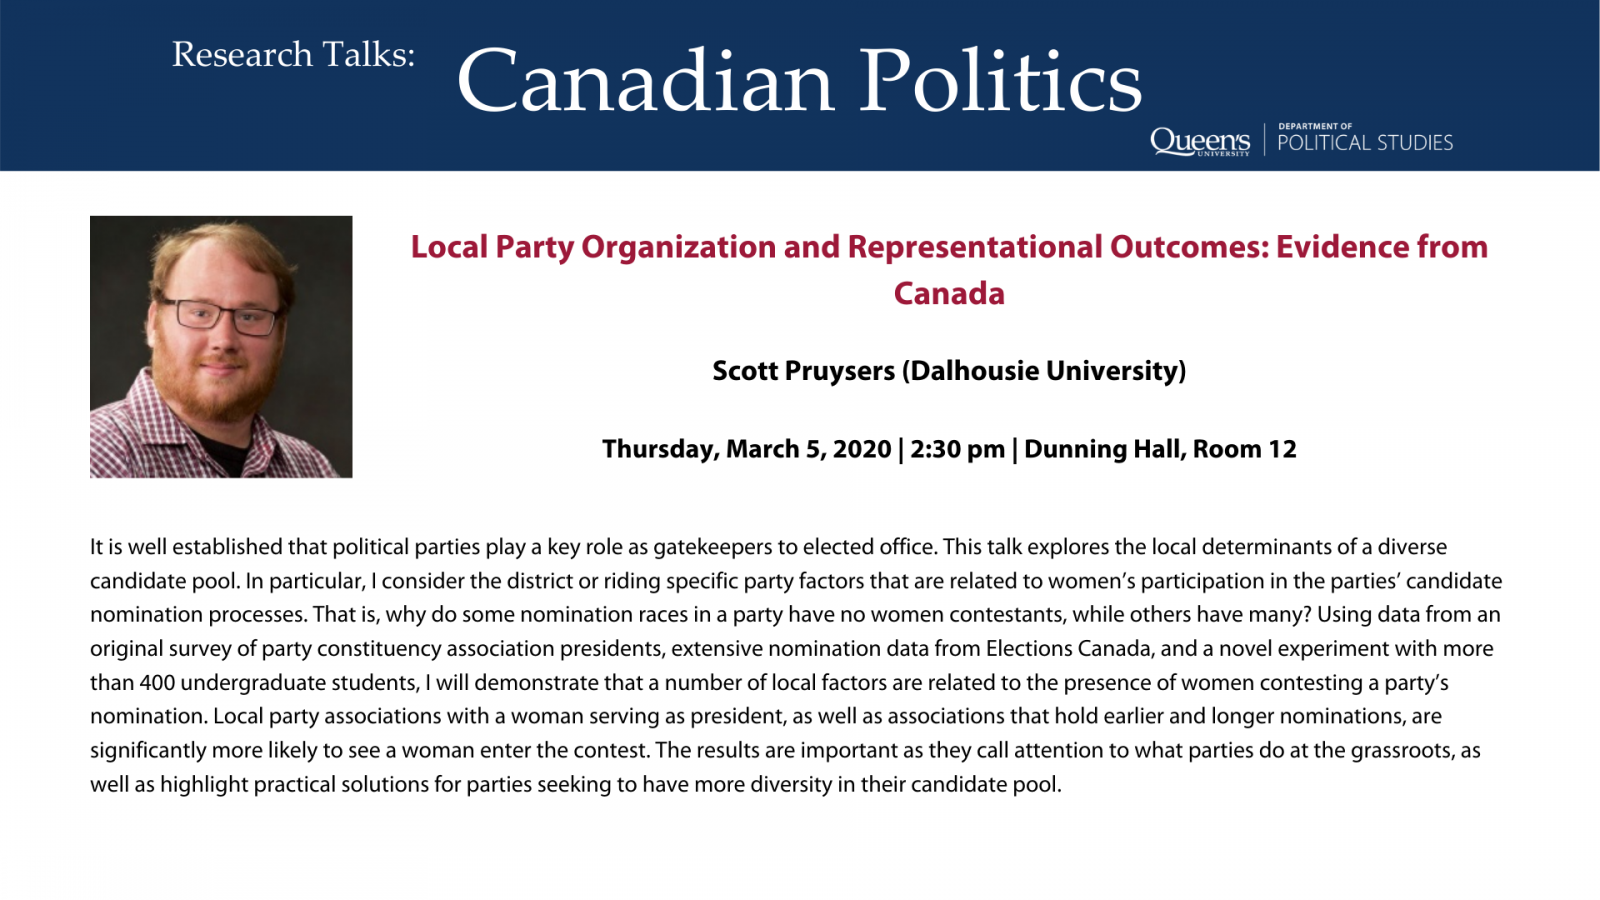 Research Talks in Canadian Politics: "Local Party Organization and Representational Outcomes: Evidence from Canada" - Scott Pruysers